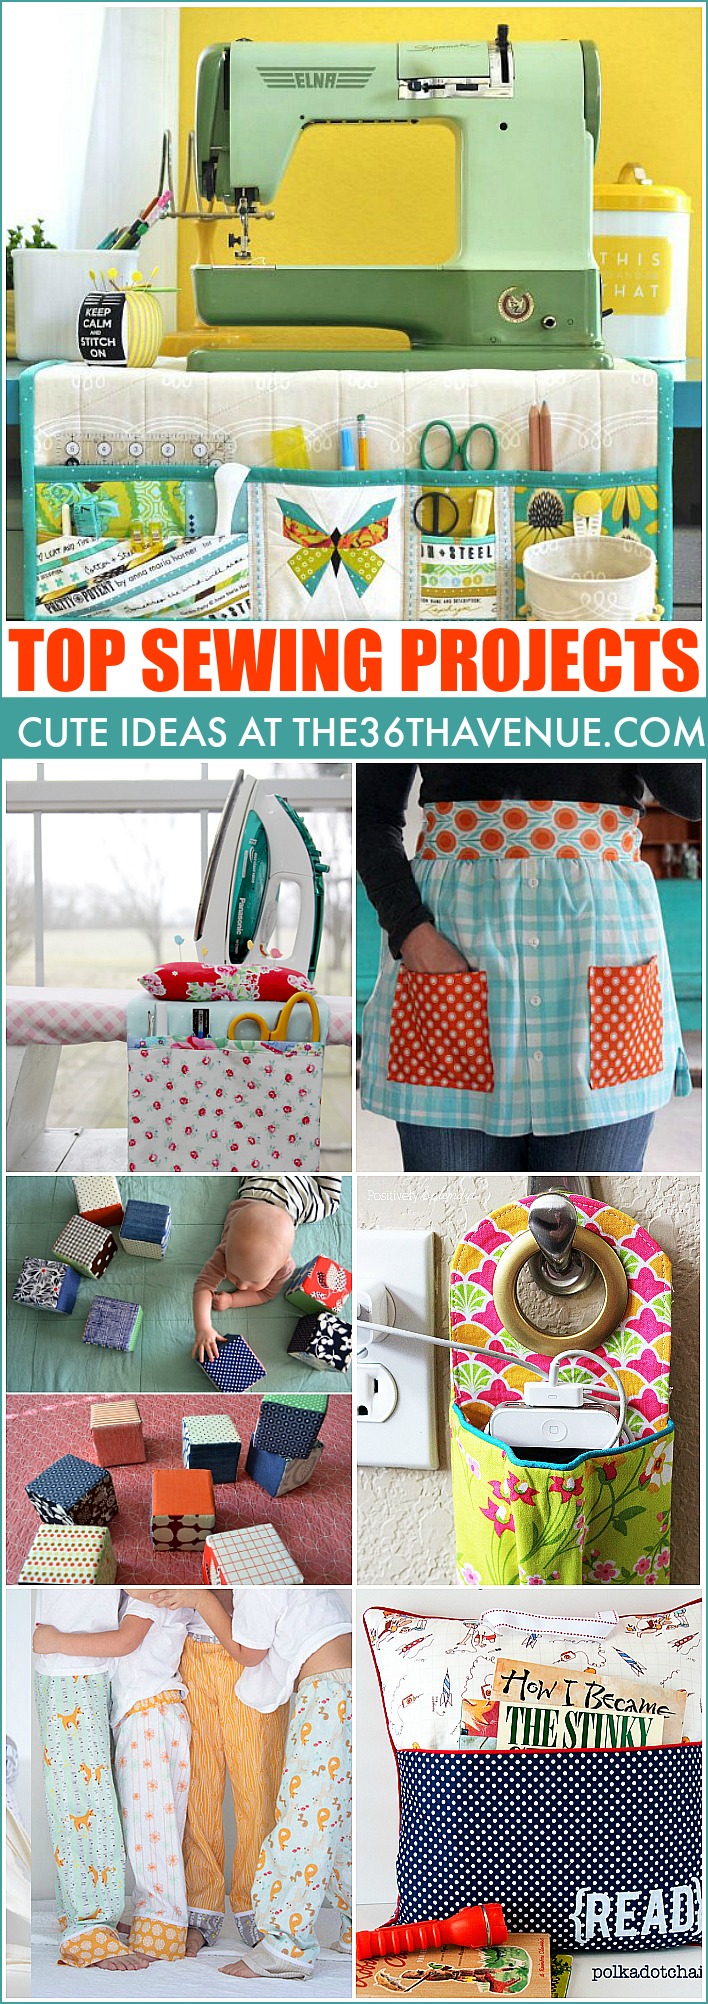 Sewing Projects at the36thavenue.com